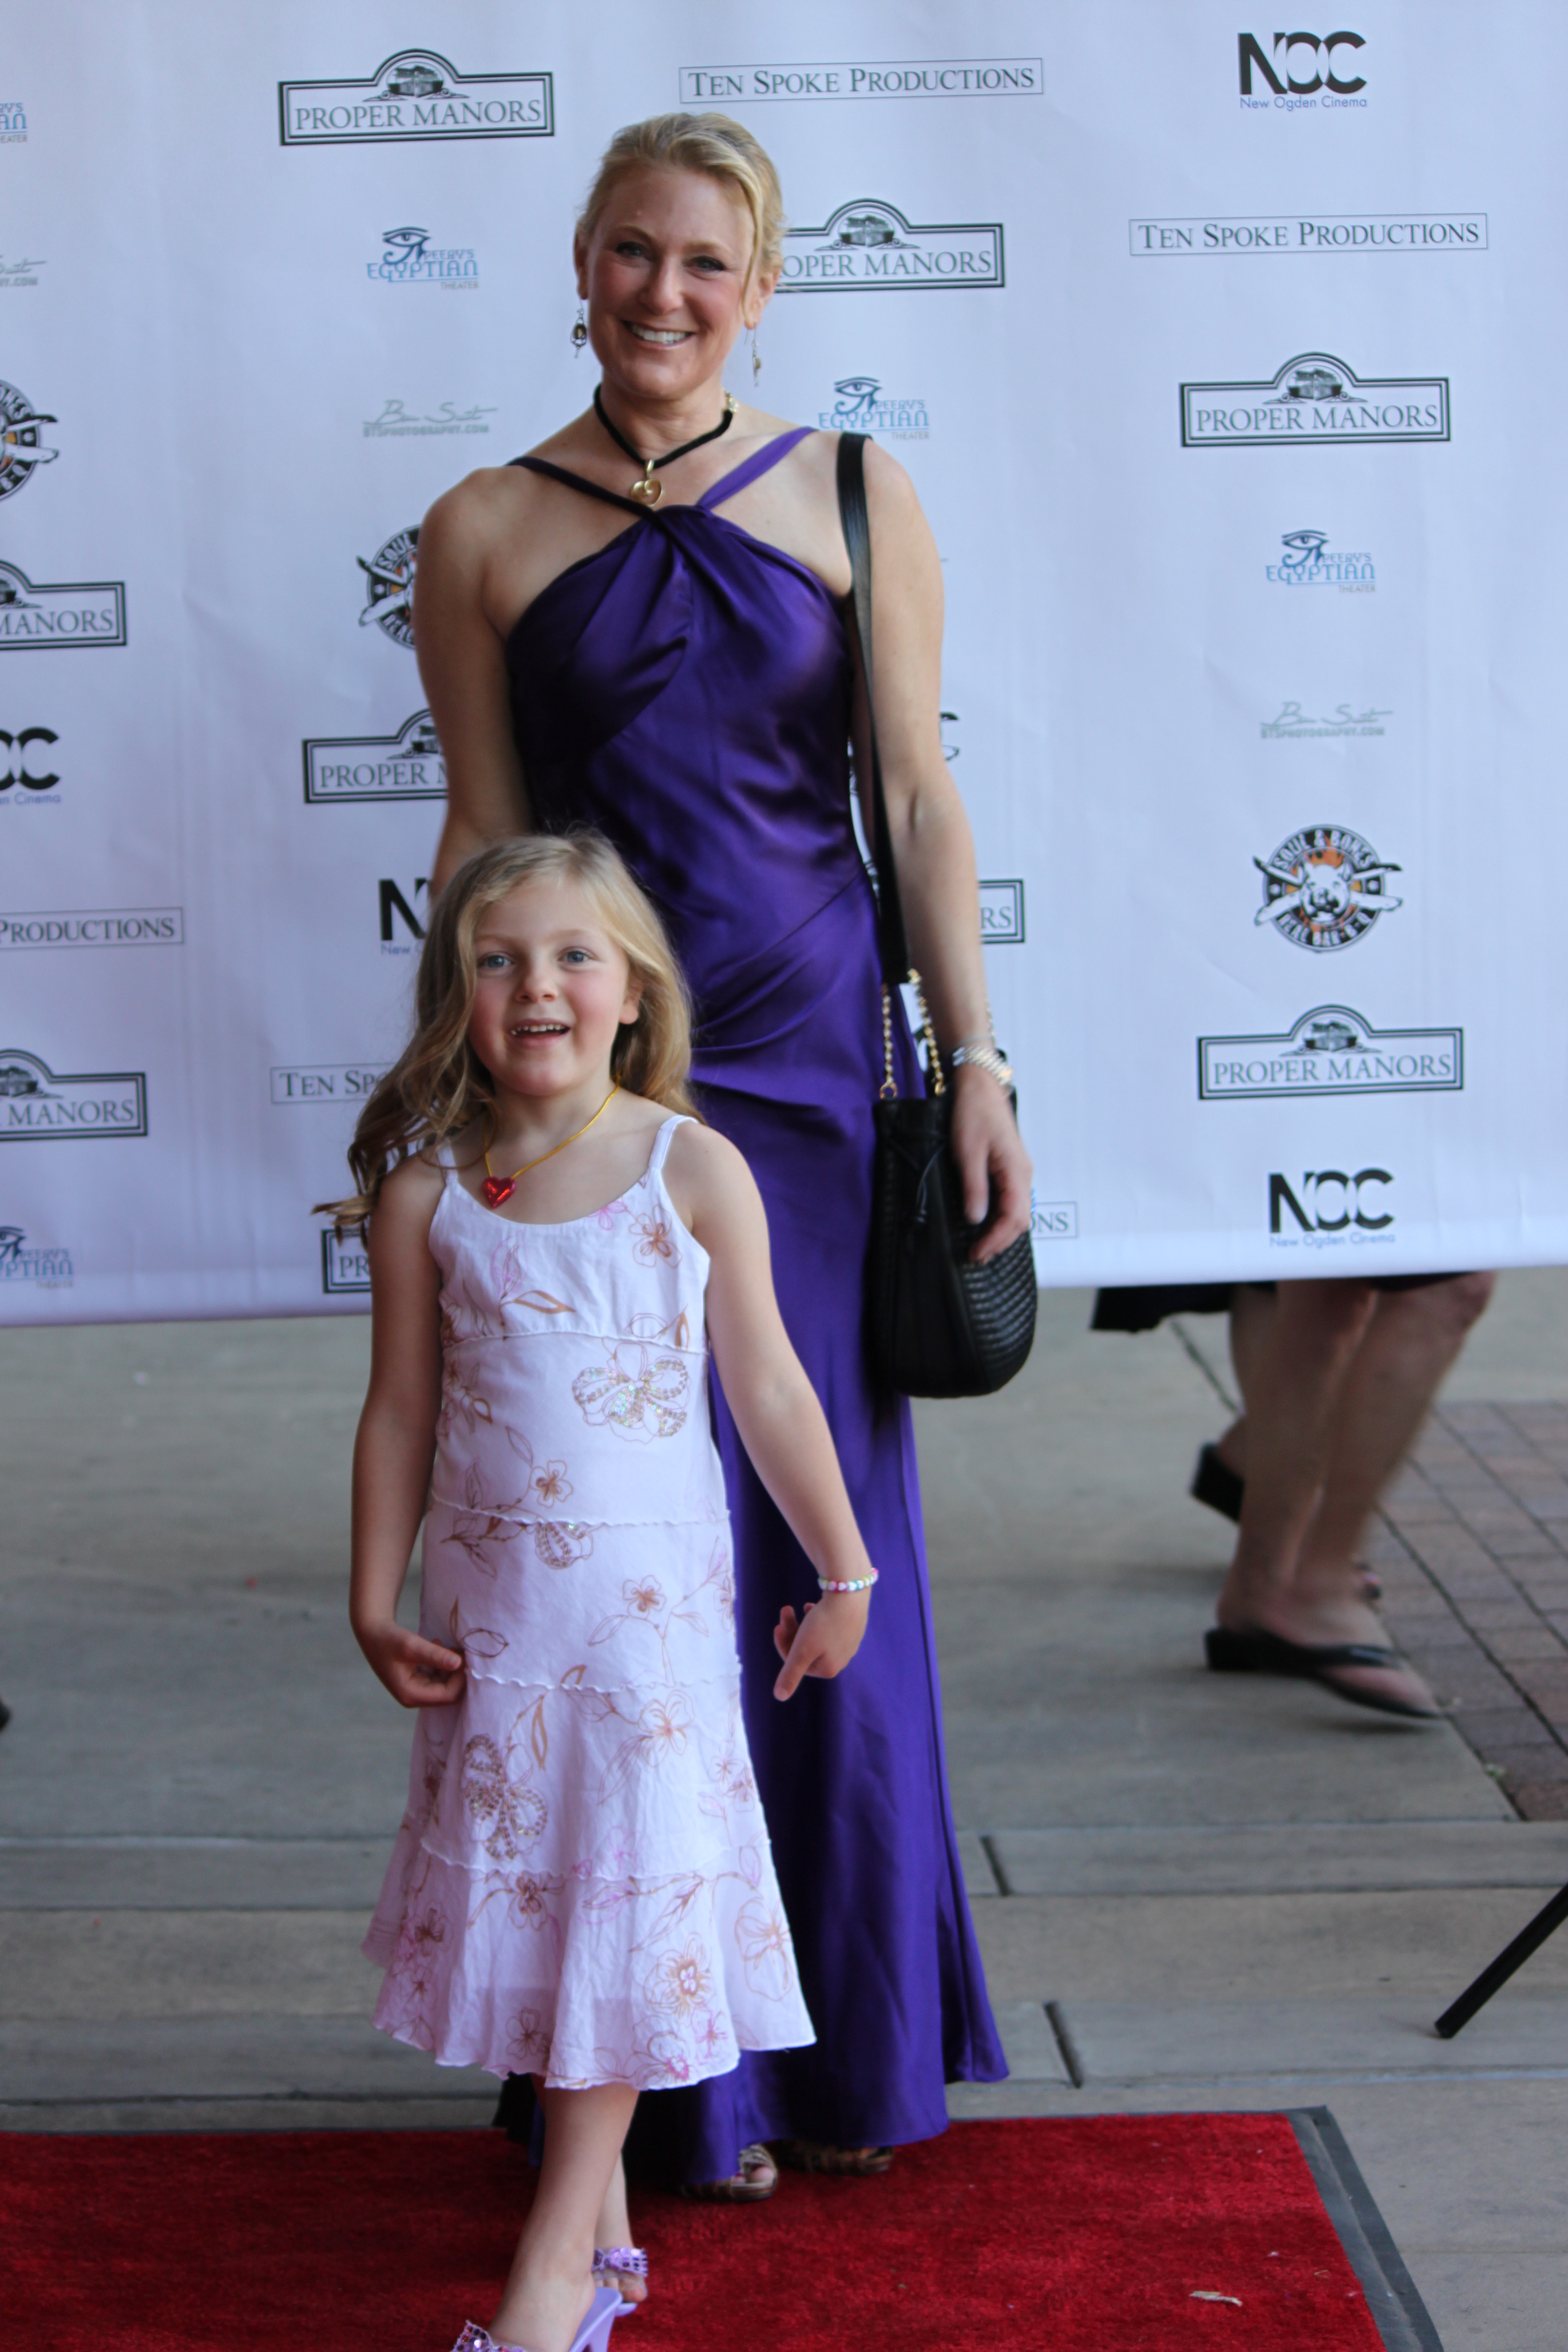 Sage and I attended the premiere of Proper Manors. A new webisoap at propermanors.tv,